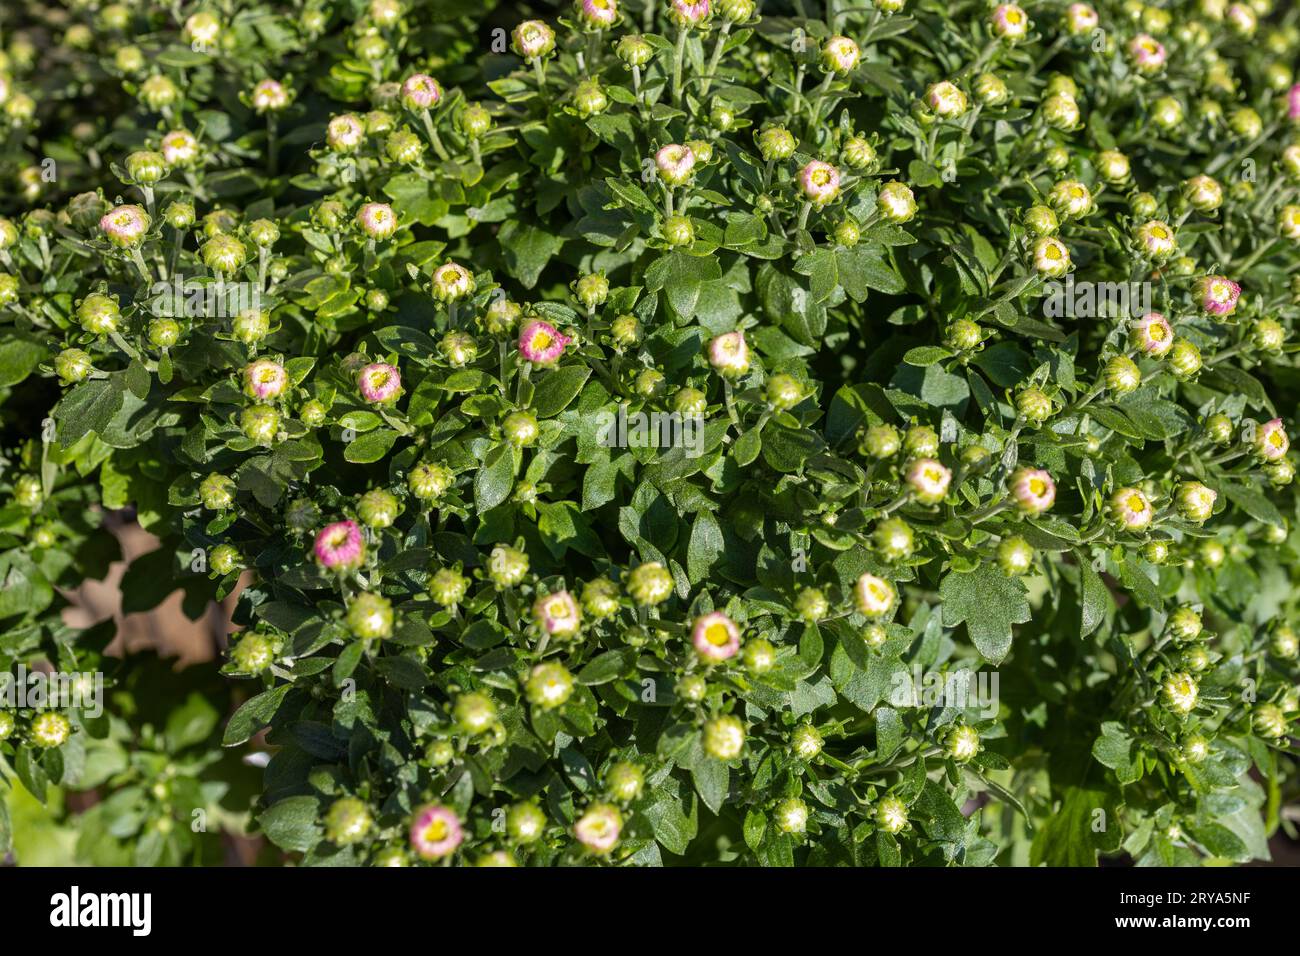 Full frame abstract texture background of newly budding autumn chrysanthemum flowers in an outdoor sunny pot Stock Photo